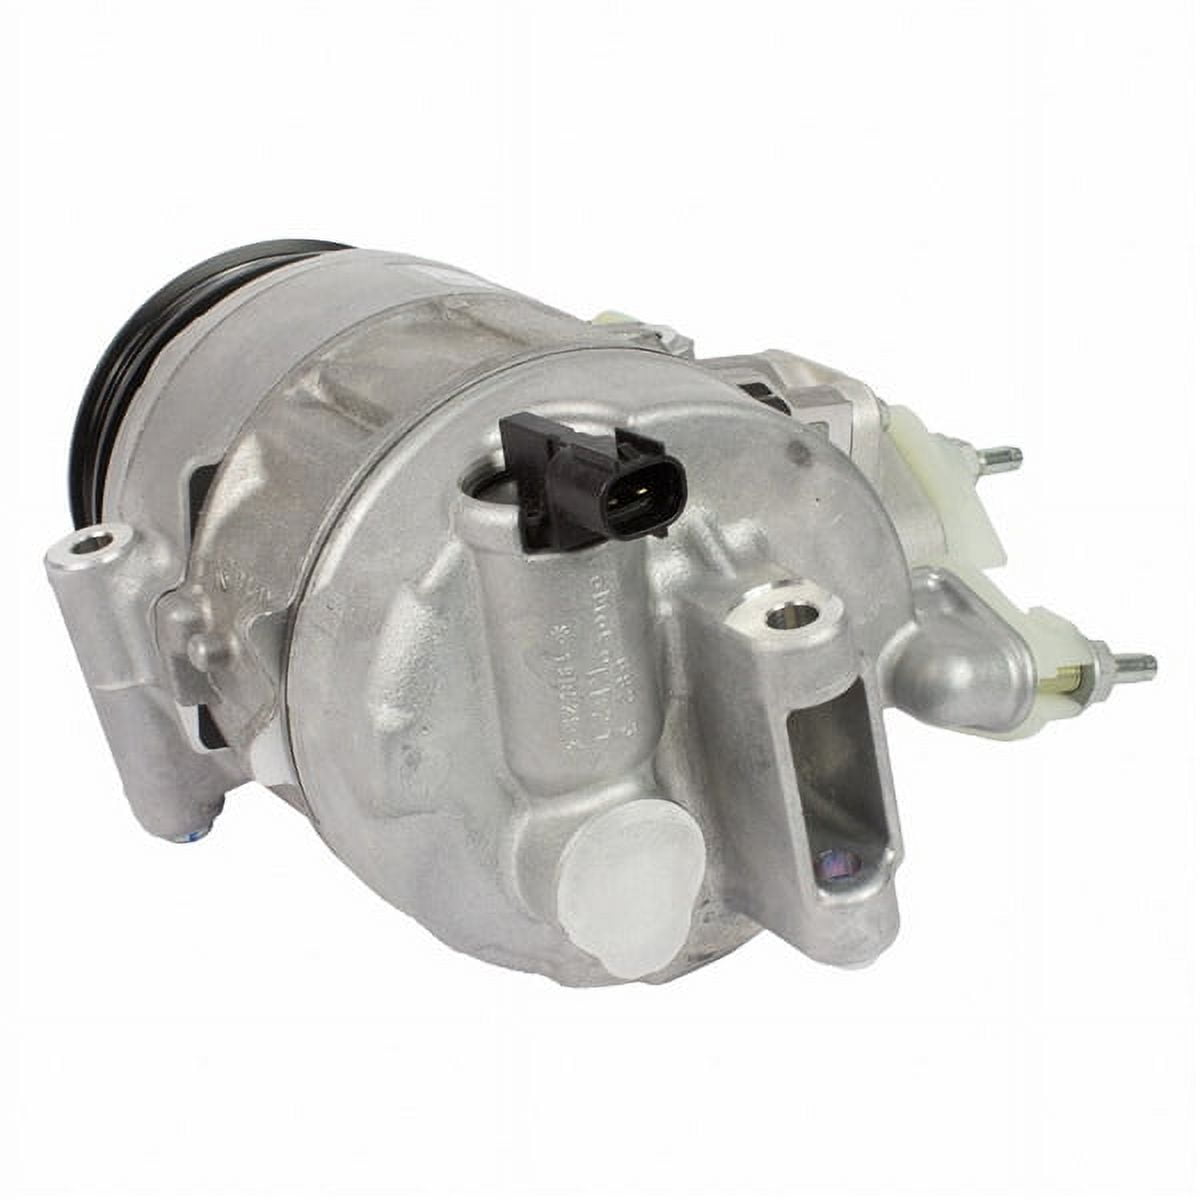 Motorcraft A/C Compressor YCC-430 Fits select: 2013-2018 FORD FUSION,  2015-2018 FORD EDGE